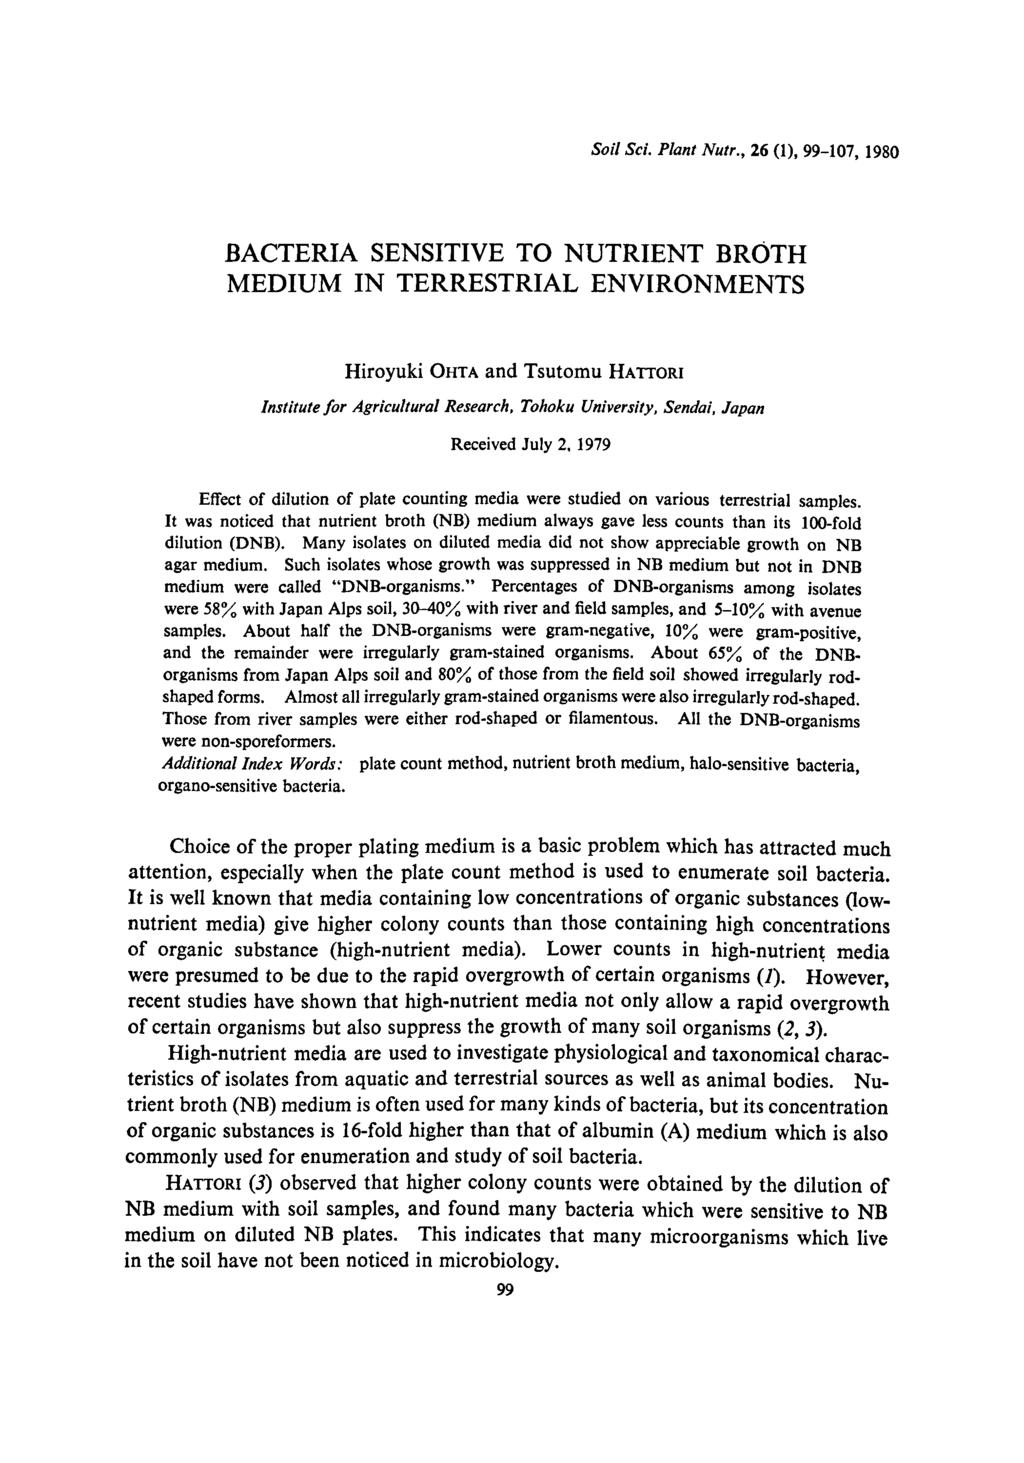 Soil Sci. Plant Nutr., 26 (1), 99-107, 1980 BACTERIA SENSITIVE TO NUTRIENT BROTH MEDIUM IN TERRESTRIAL ENVIRONMENTS Hiroyuki OHTA and Tsutomu HATTORI Institute for Agricultural Research.